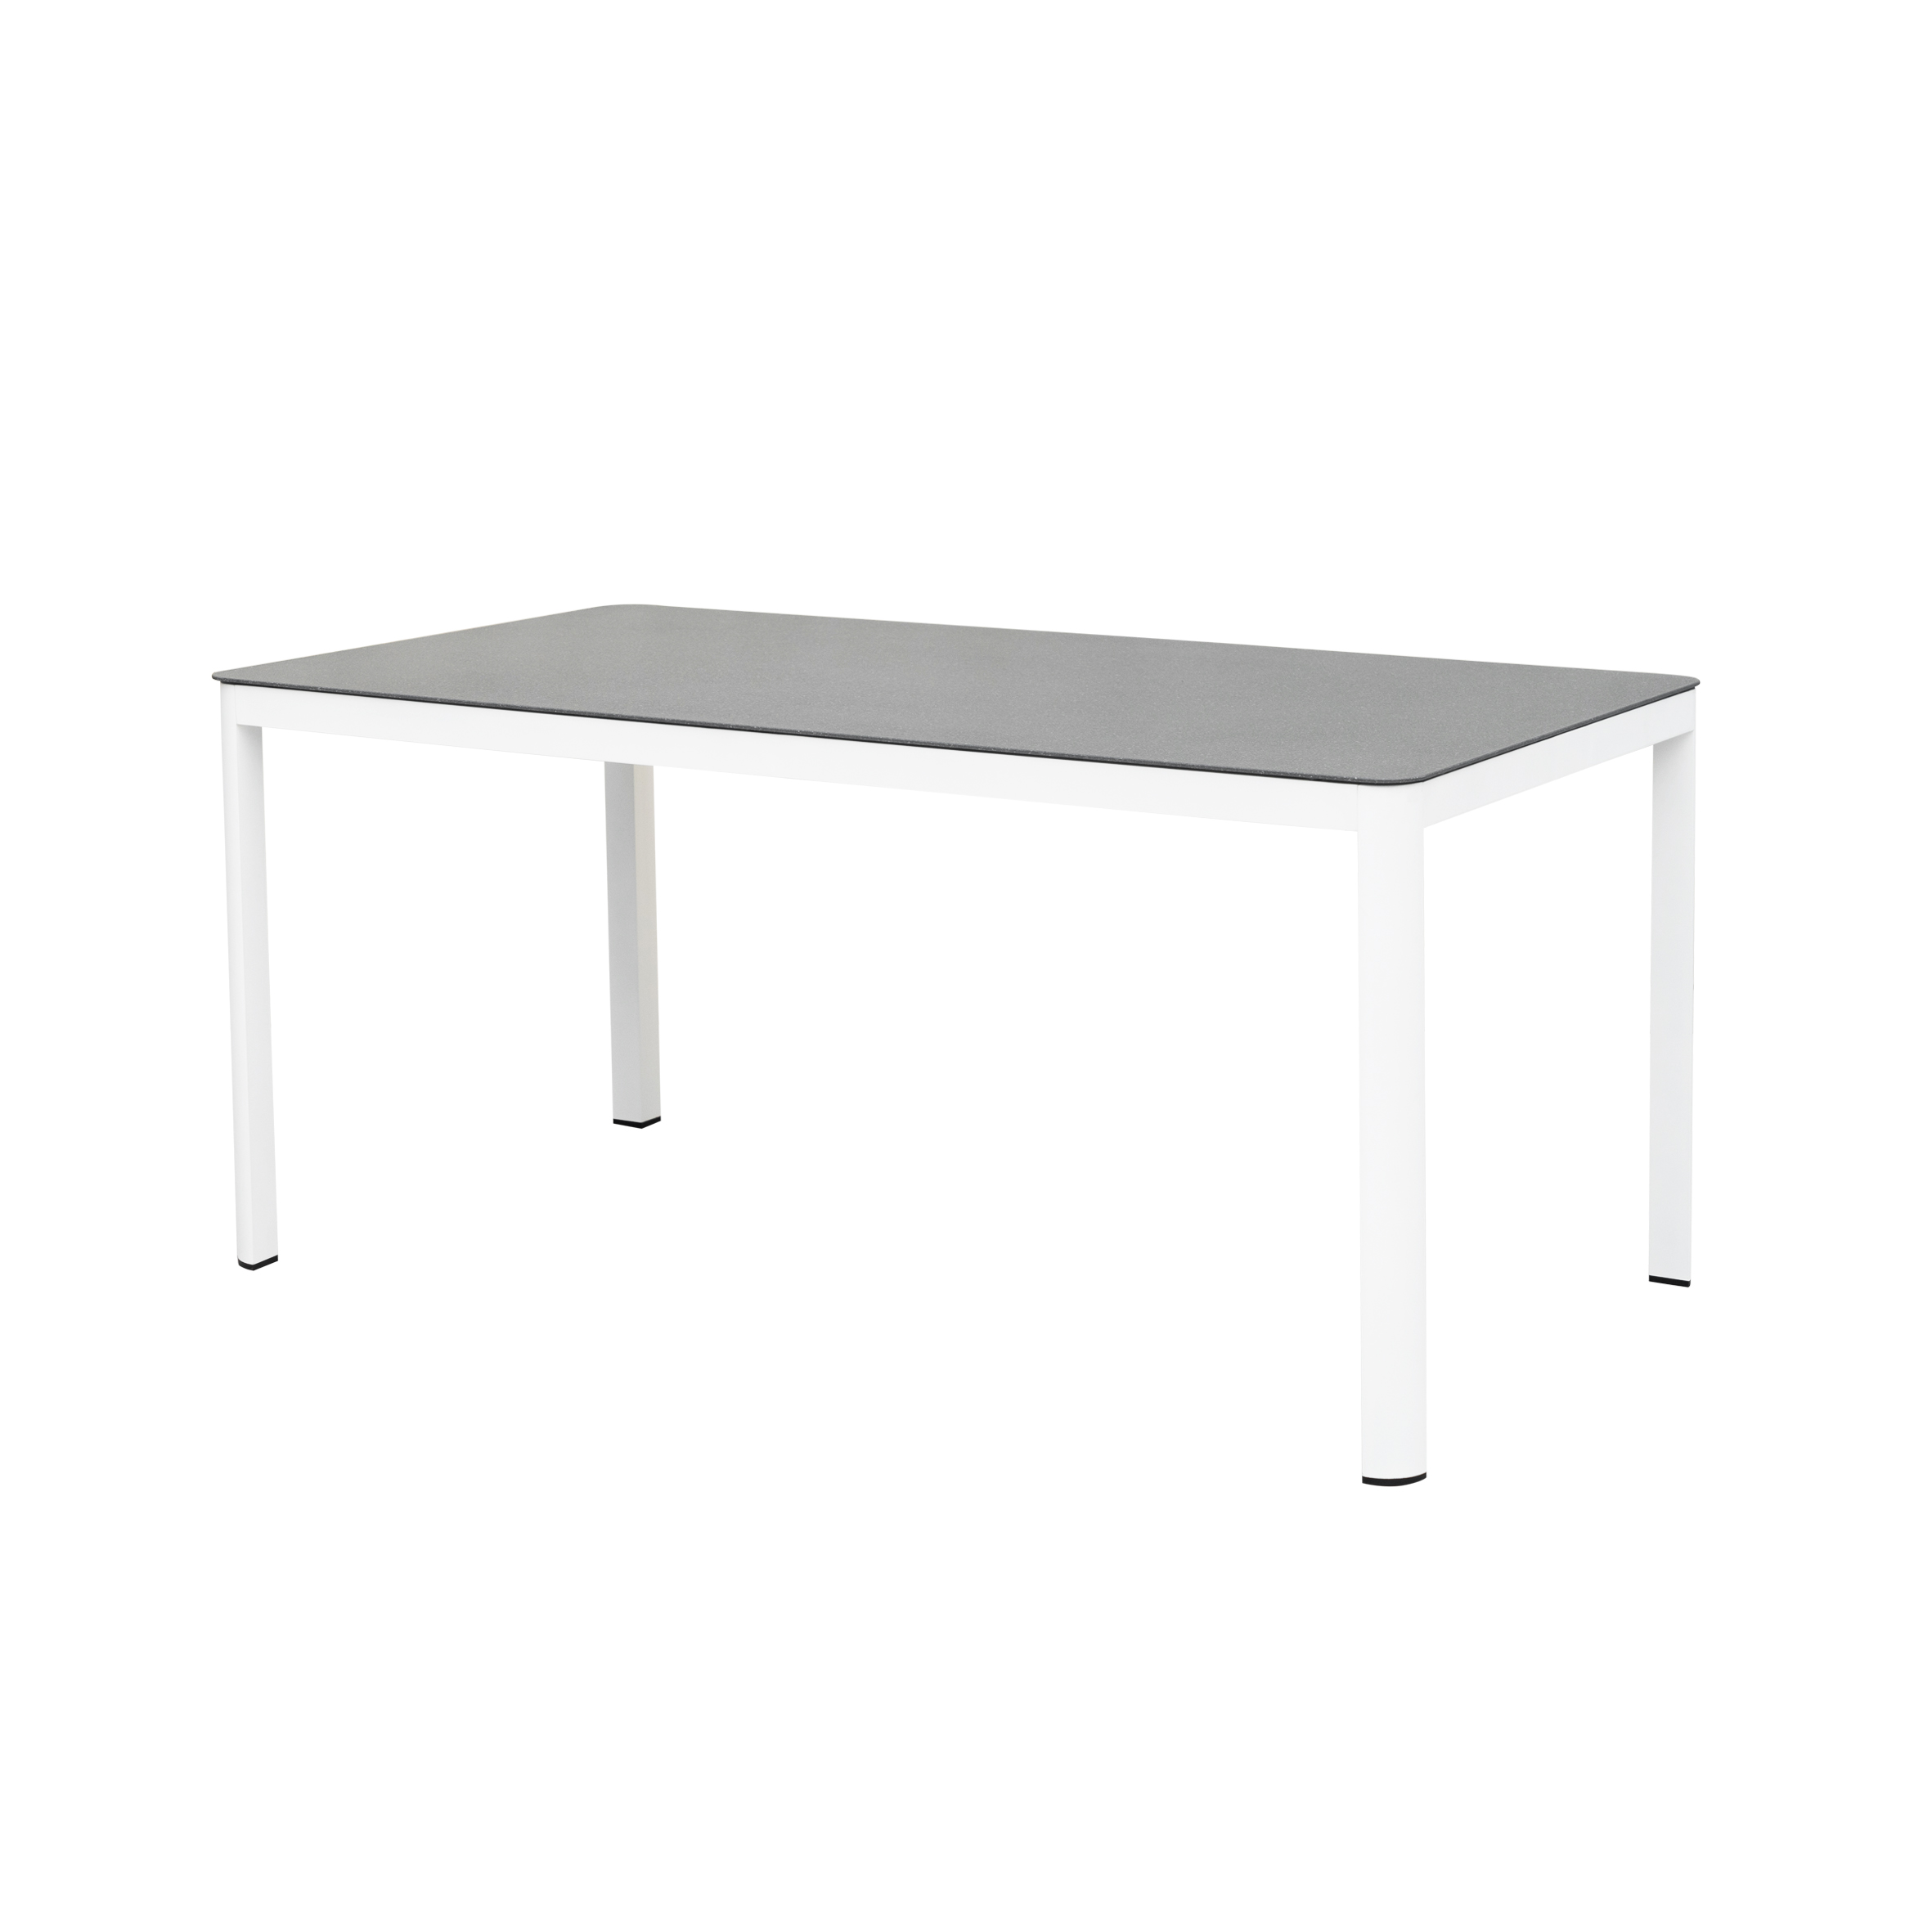 China wholesale Aluminum Table Suppliers –  Belgium rectangle table(Stone glass) – TAILONG